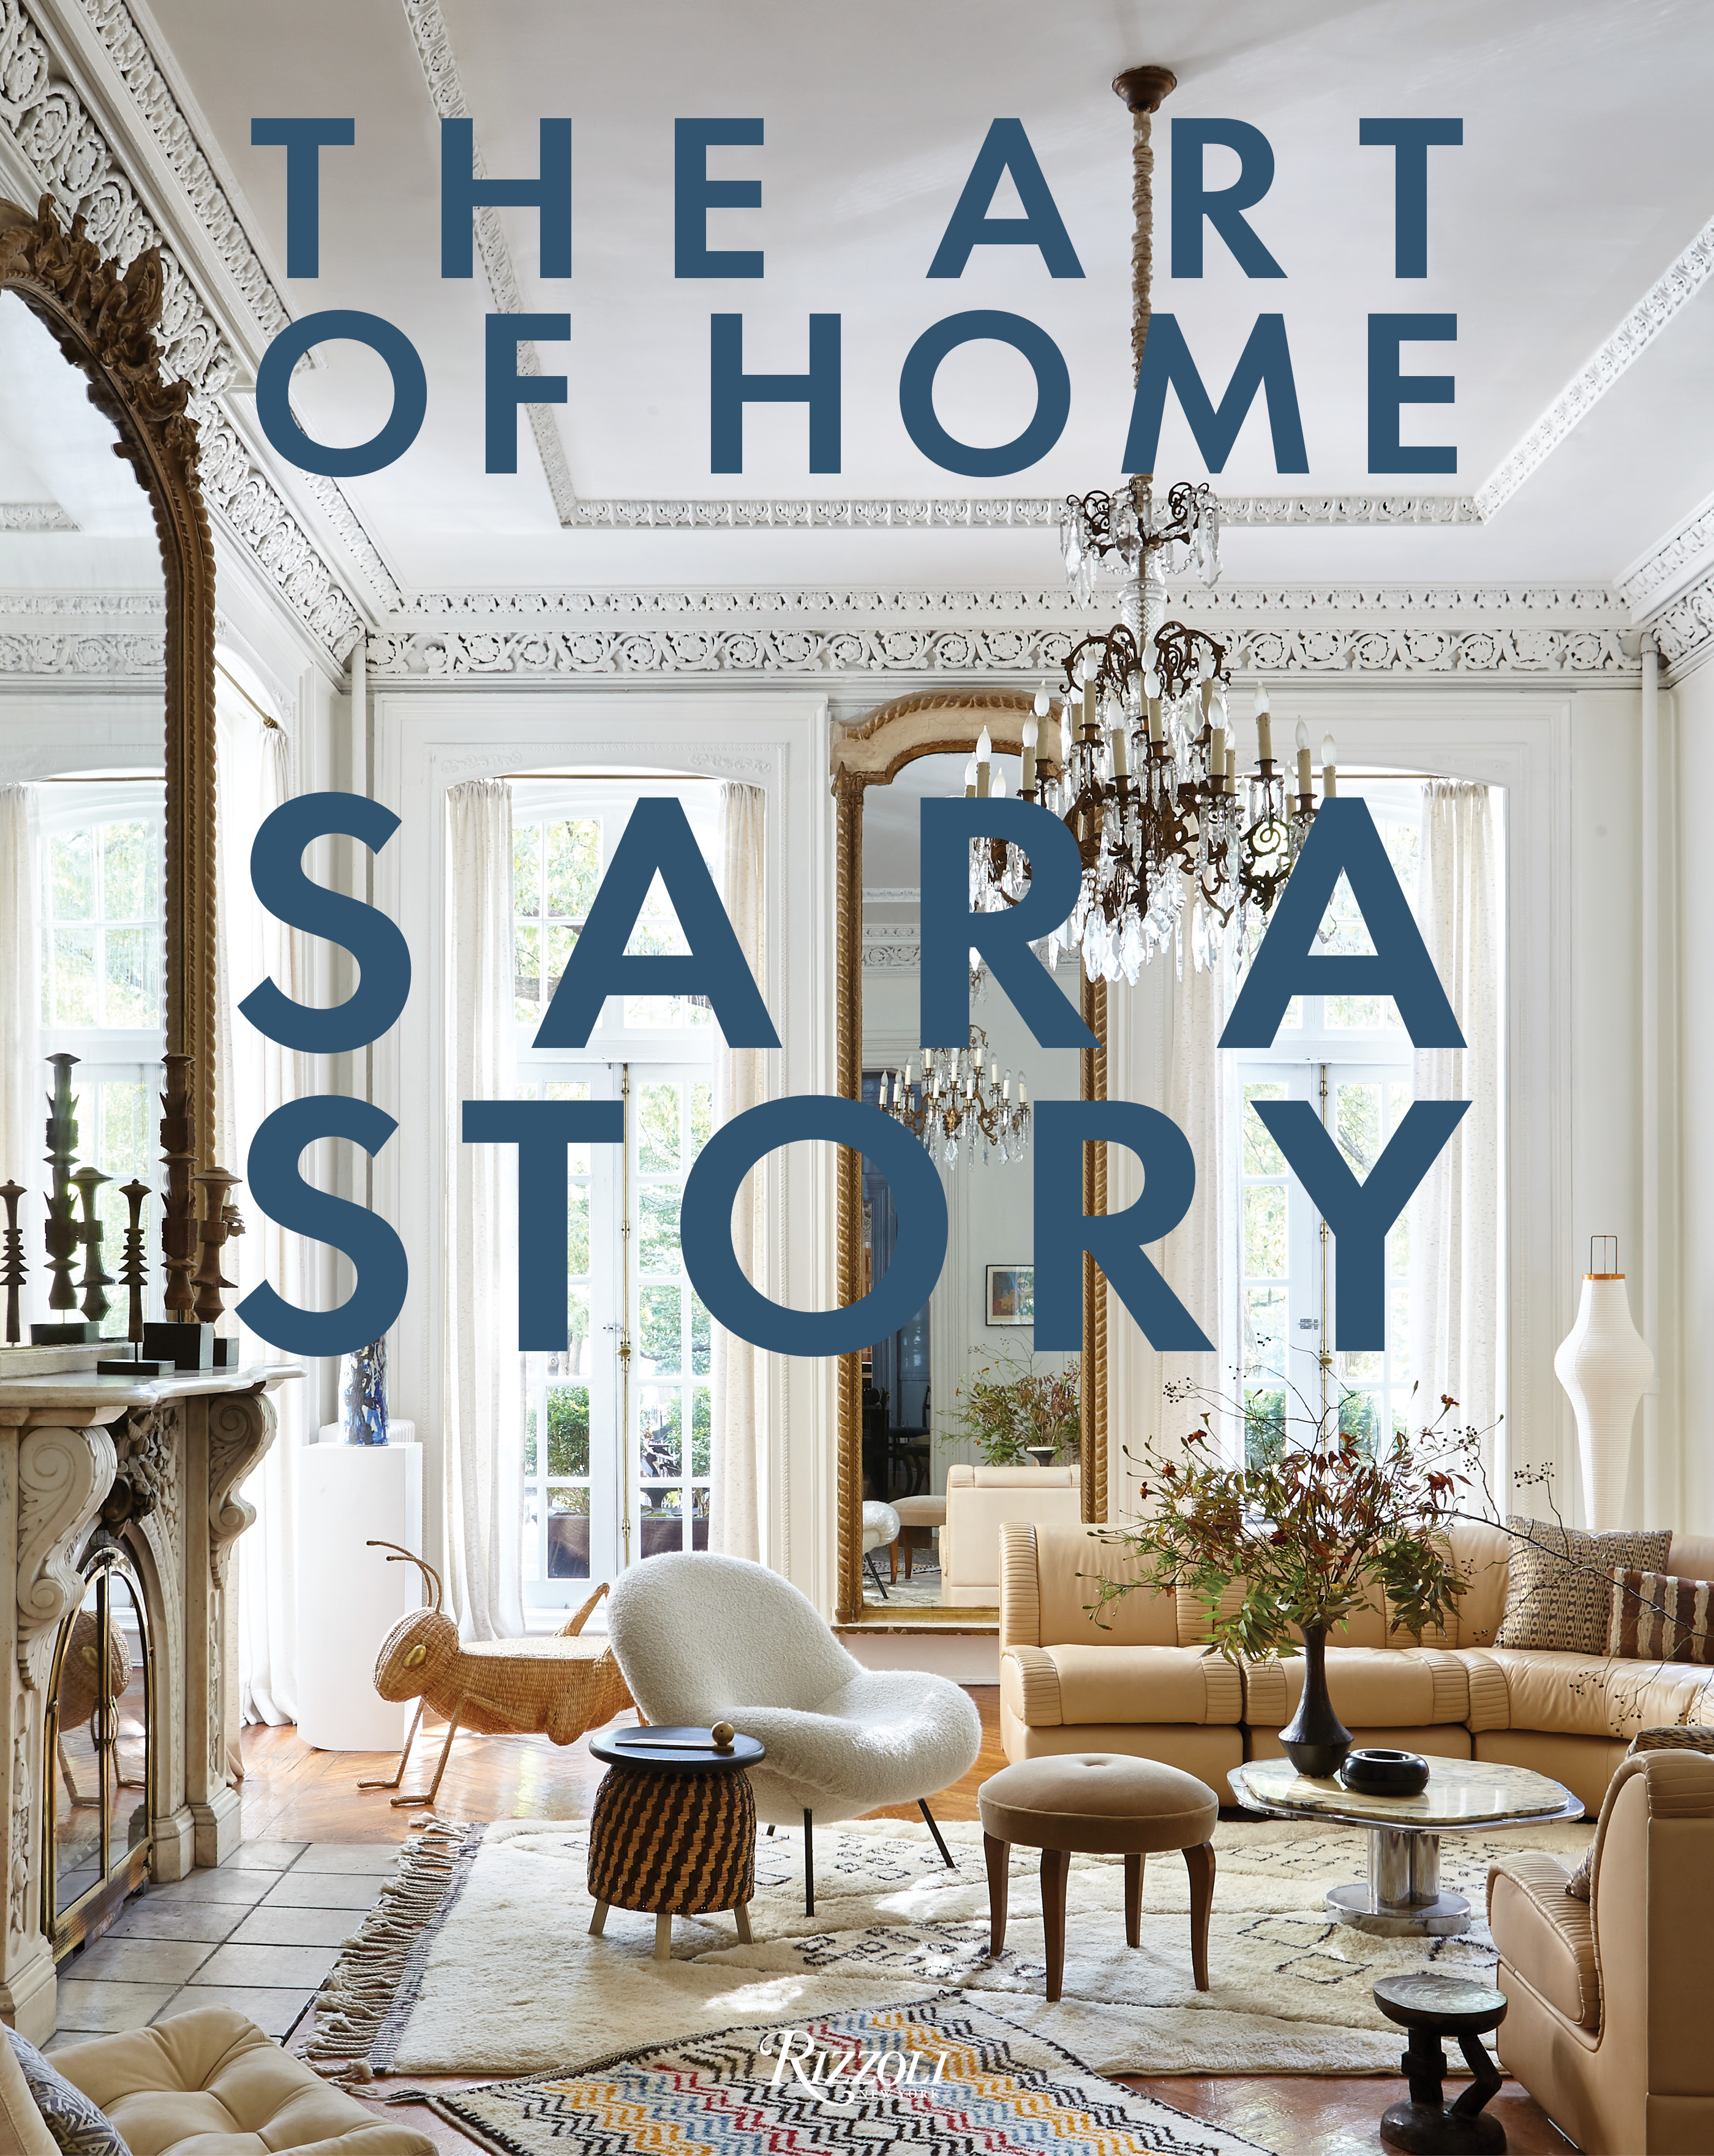 THE ART OF HOME - SARA STORY. Click for more information.